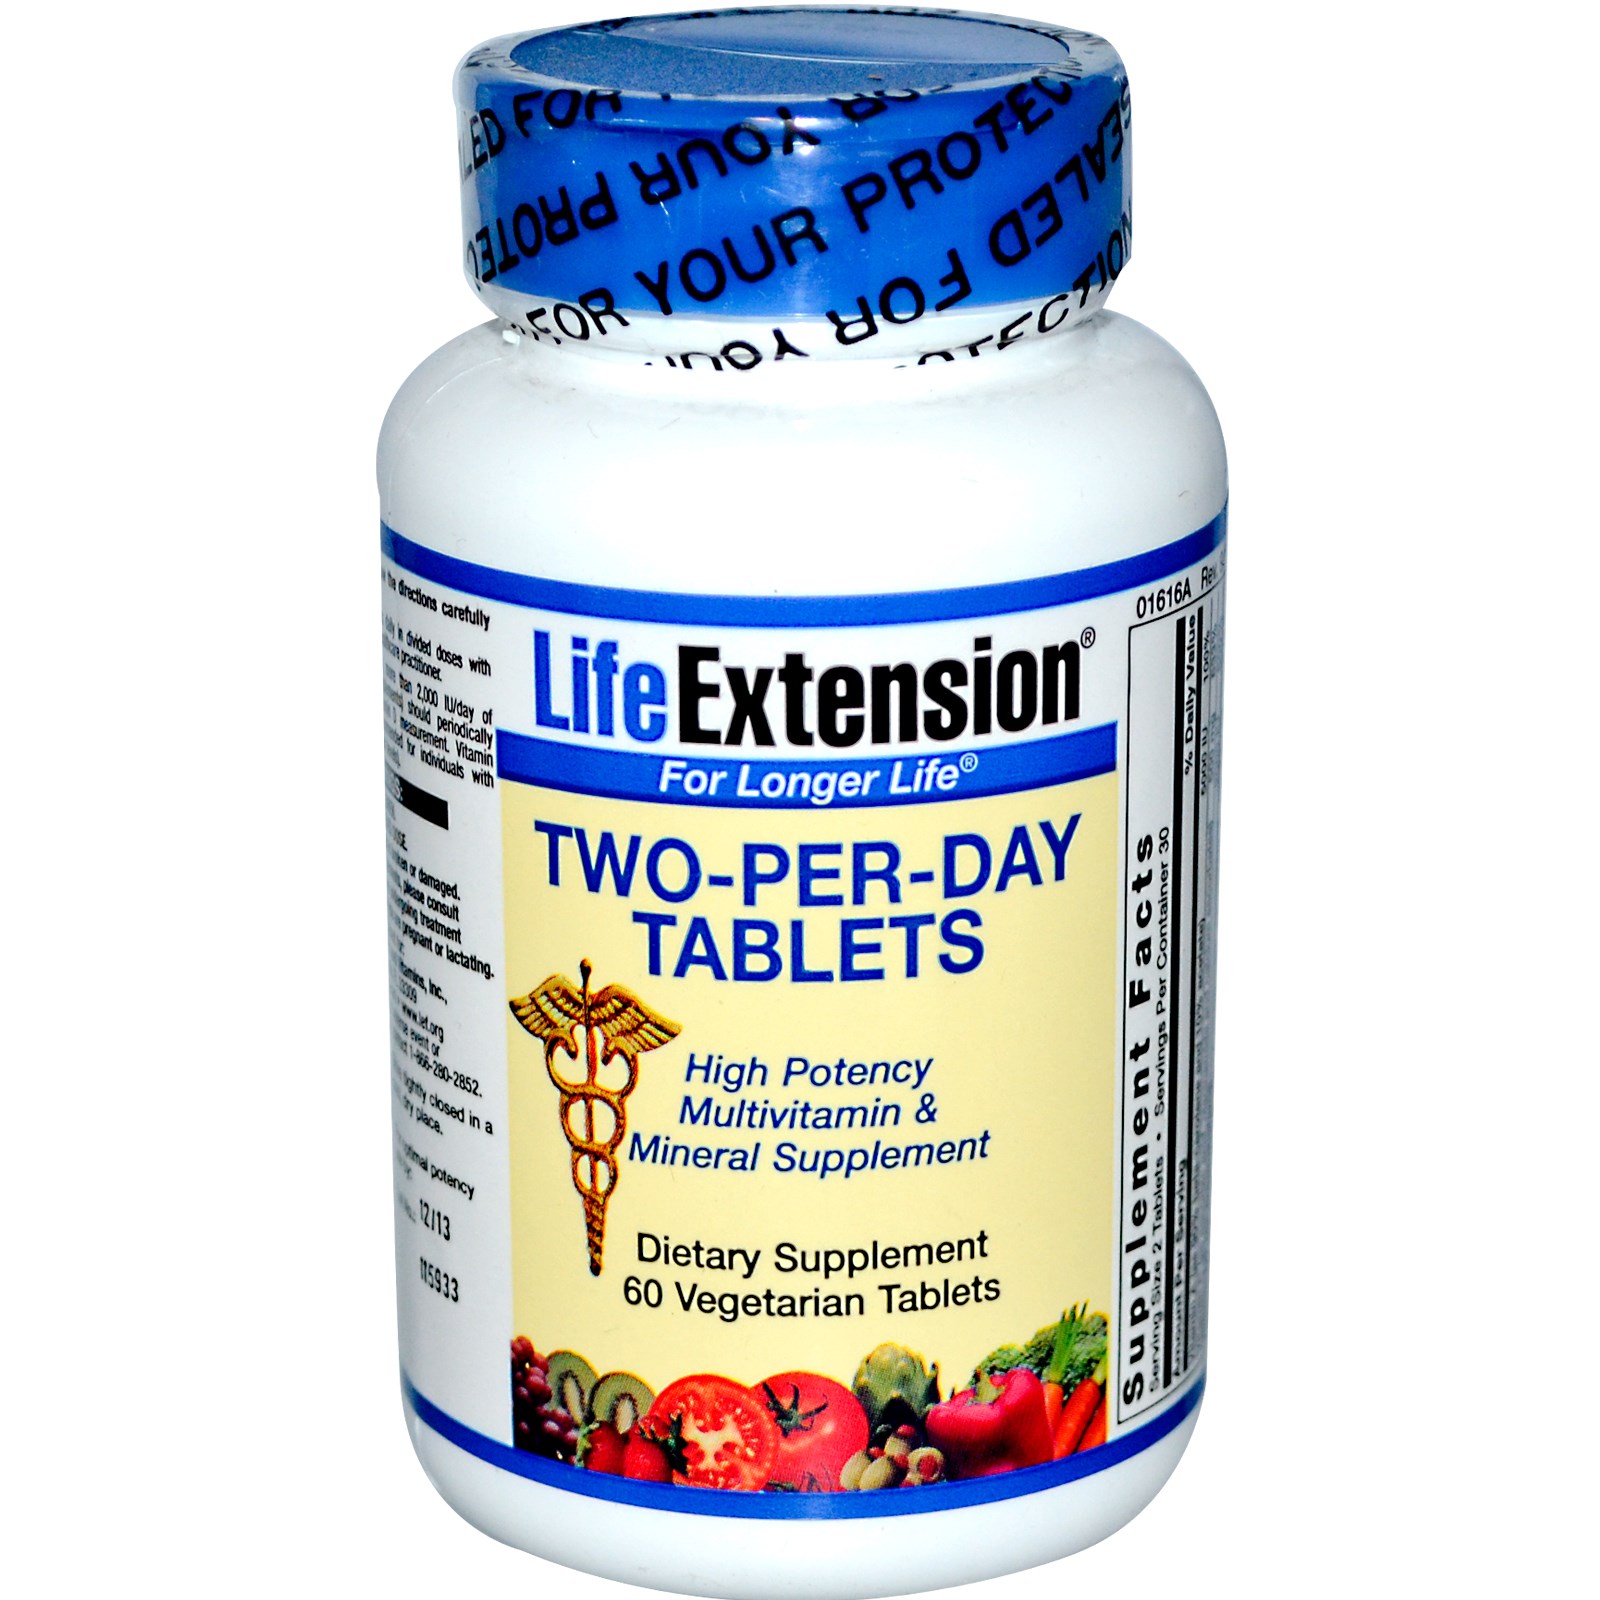 Two per day инструкция. Life Extension two-per-Day Multivitamin (60 таб). Витамины two per Day Multivitamin. Life Extension two-per-Day Multivitamin 60 Tablets. Life Extension two-per-Day Multivitamin 120 капсул.